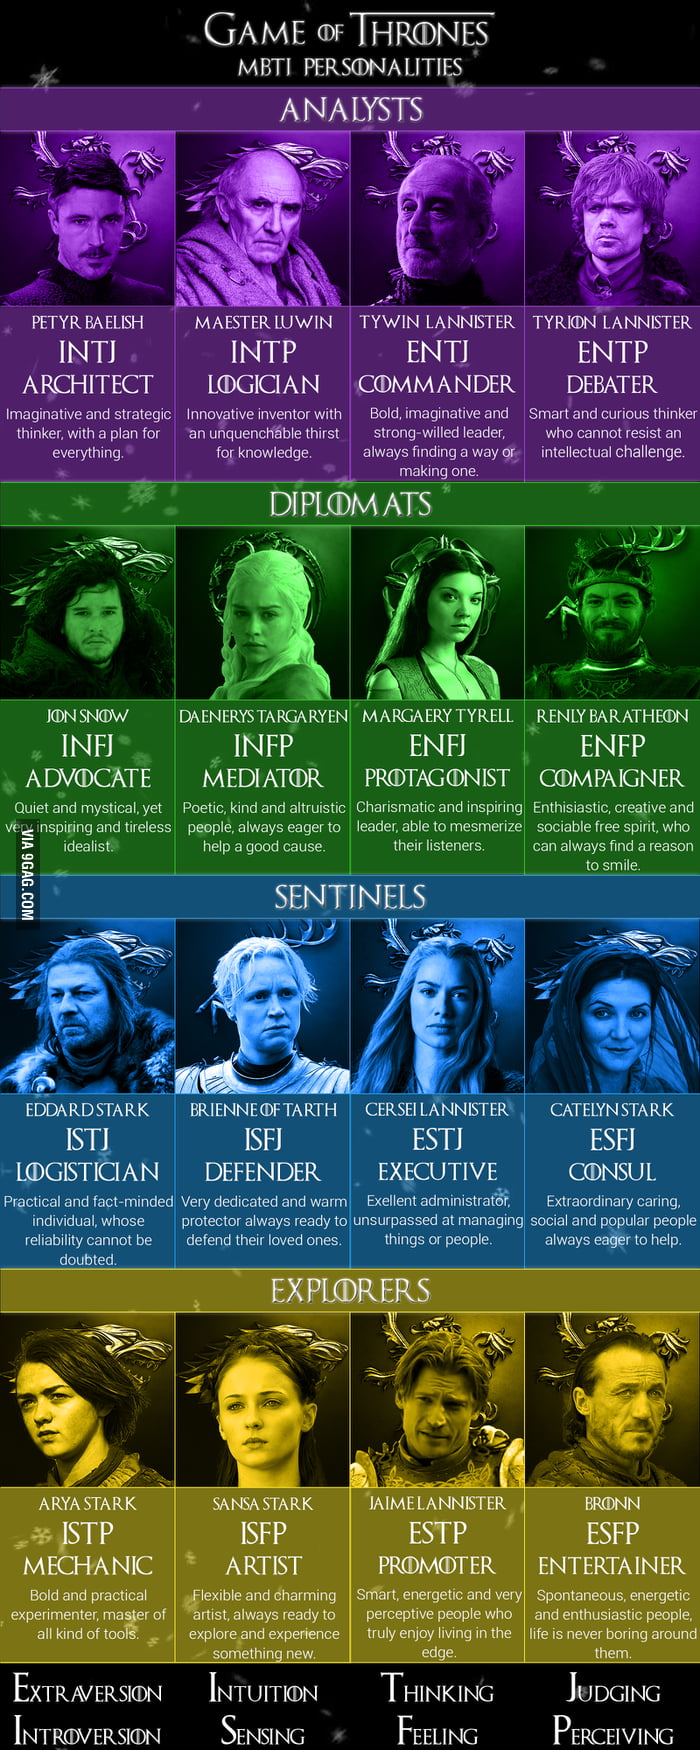 Game of thrones - MBTI personalities which character are you ? - 9GAG